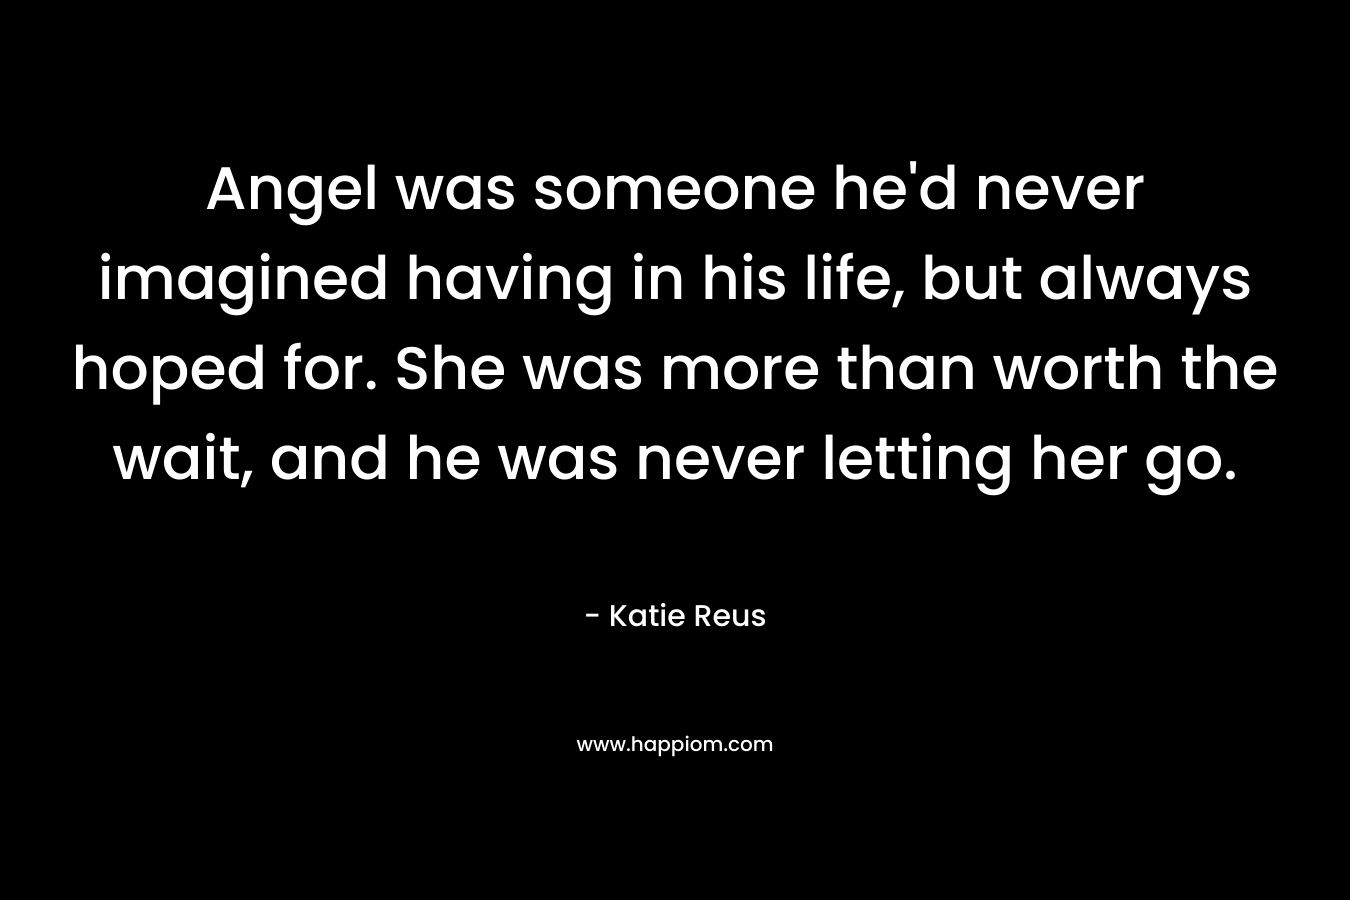 Angel was someone he'd never imagined having in his life, but always hoped for. She was more than worth the wait, and he was never letting her go.